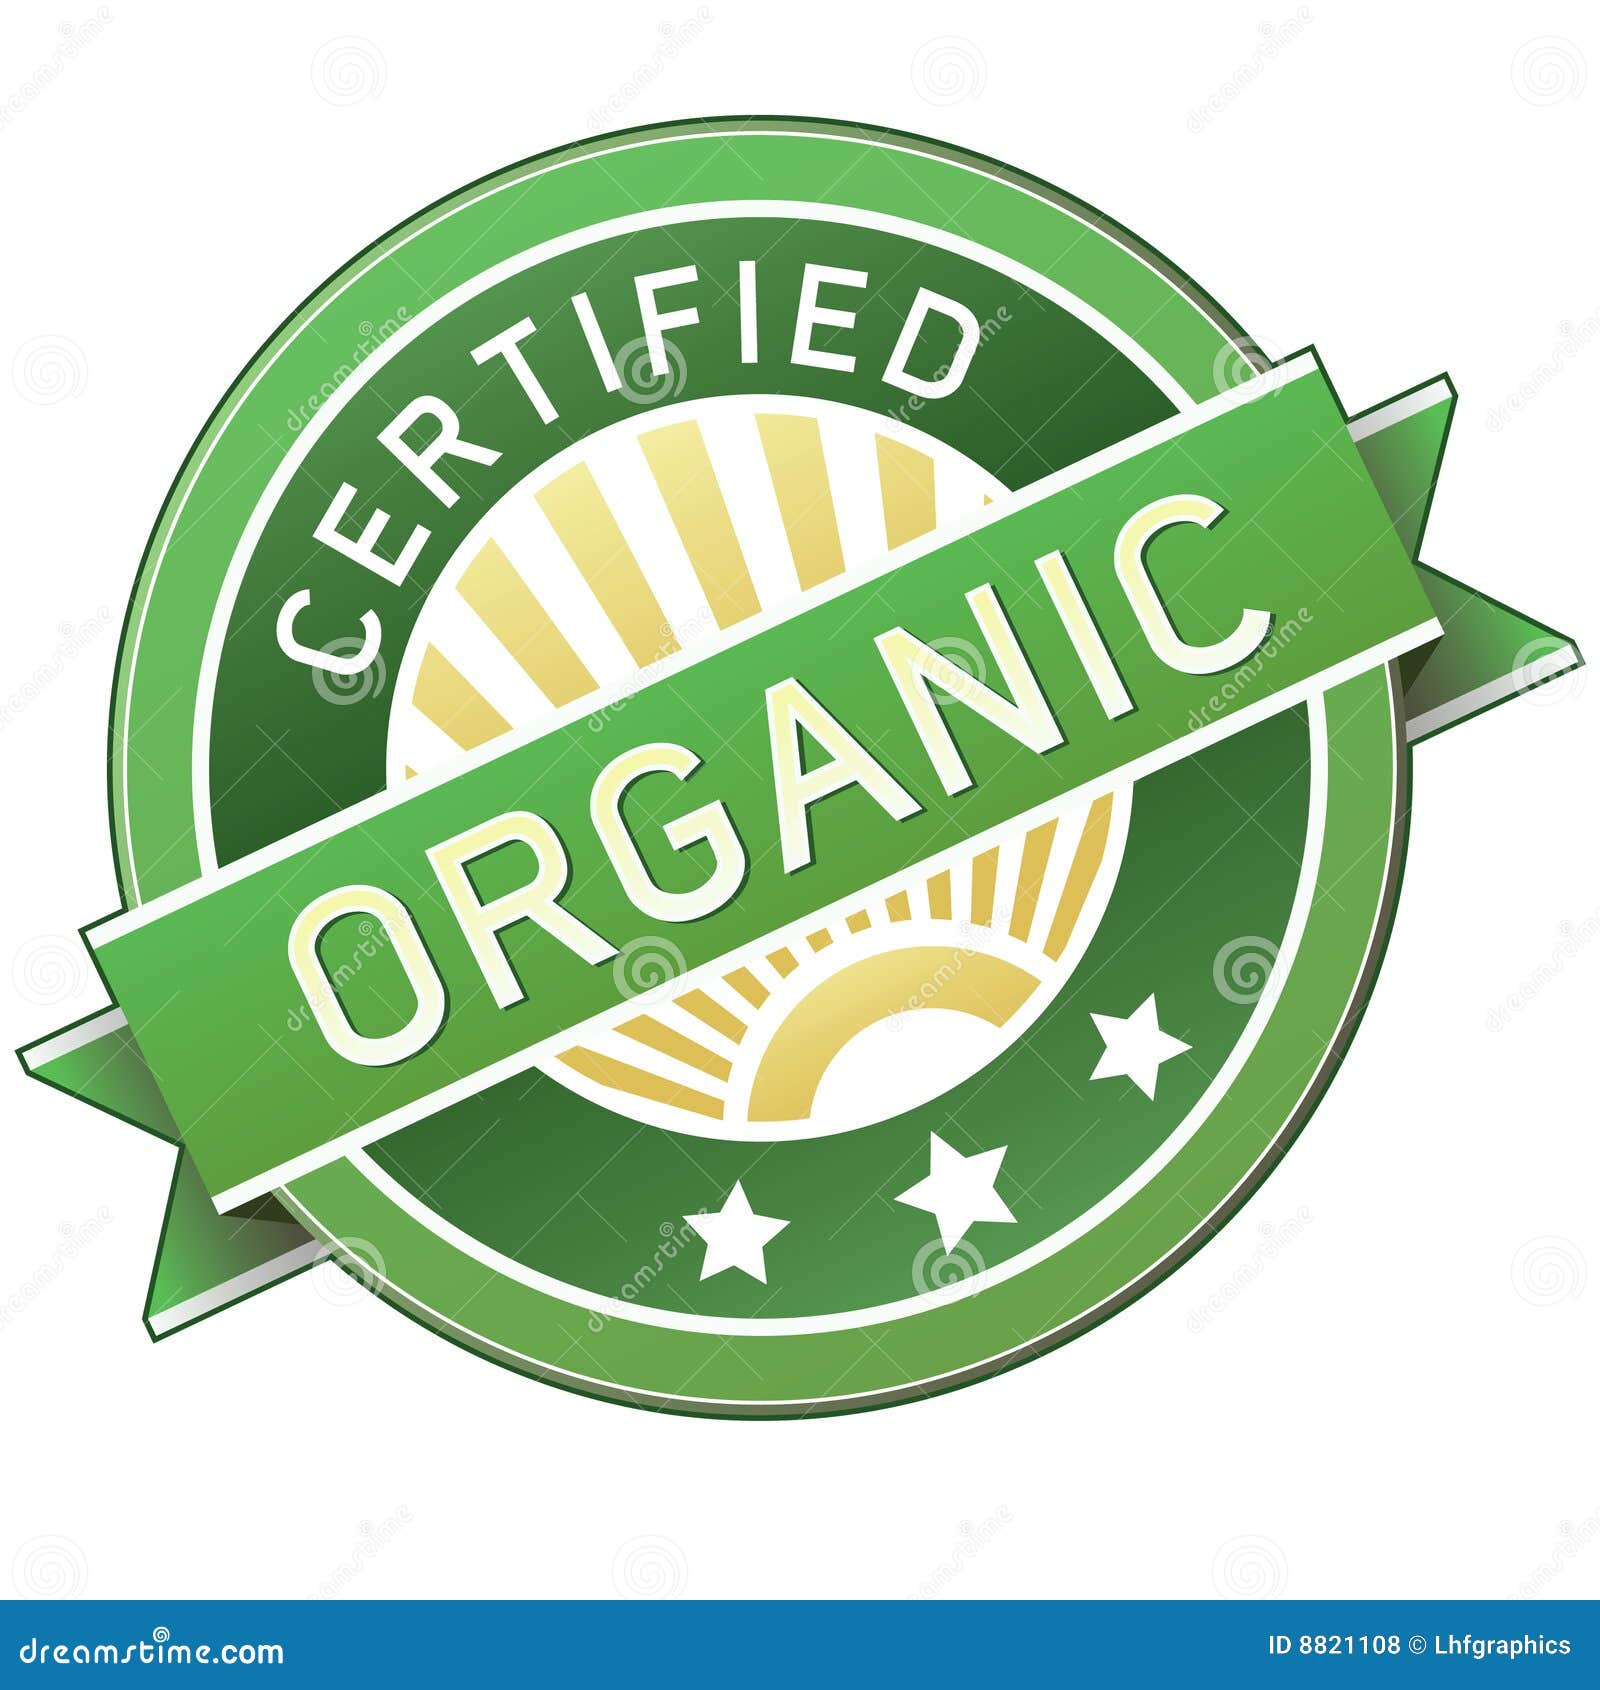 certified organic product or food label